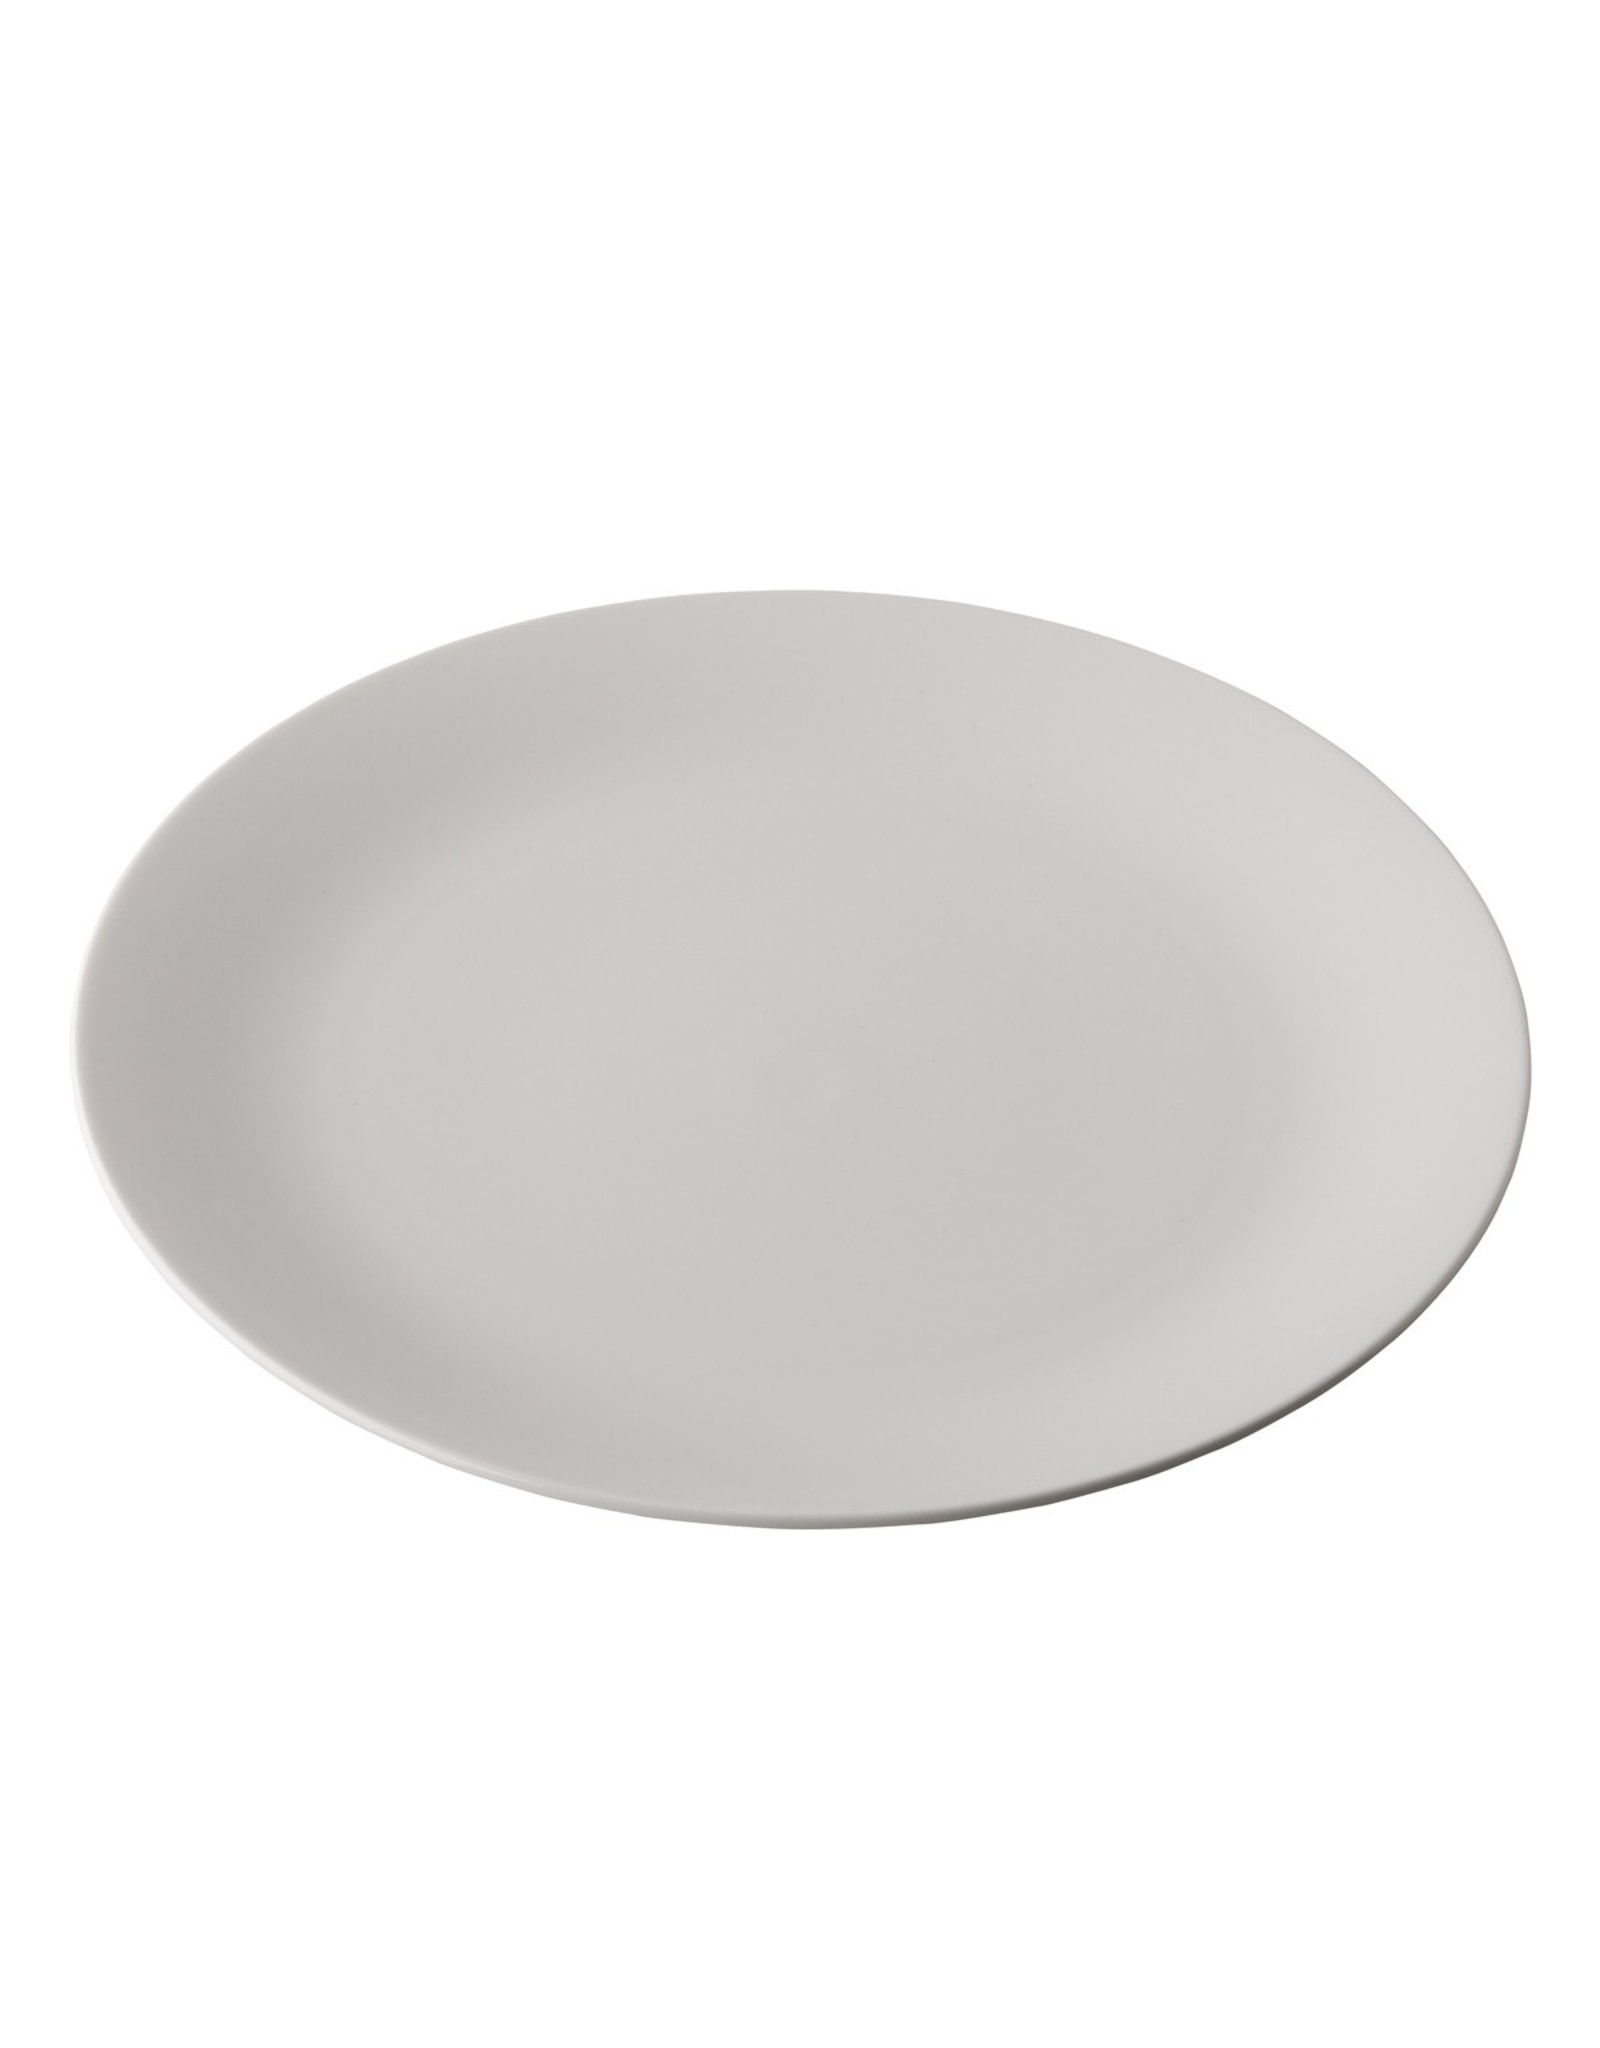 Stylepoint St. James Coupe plate 21,5 cm